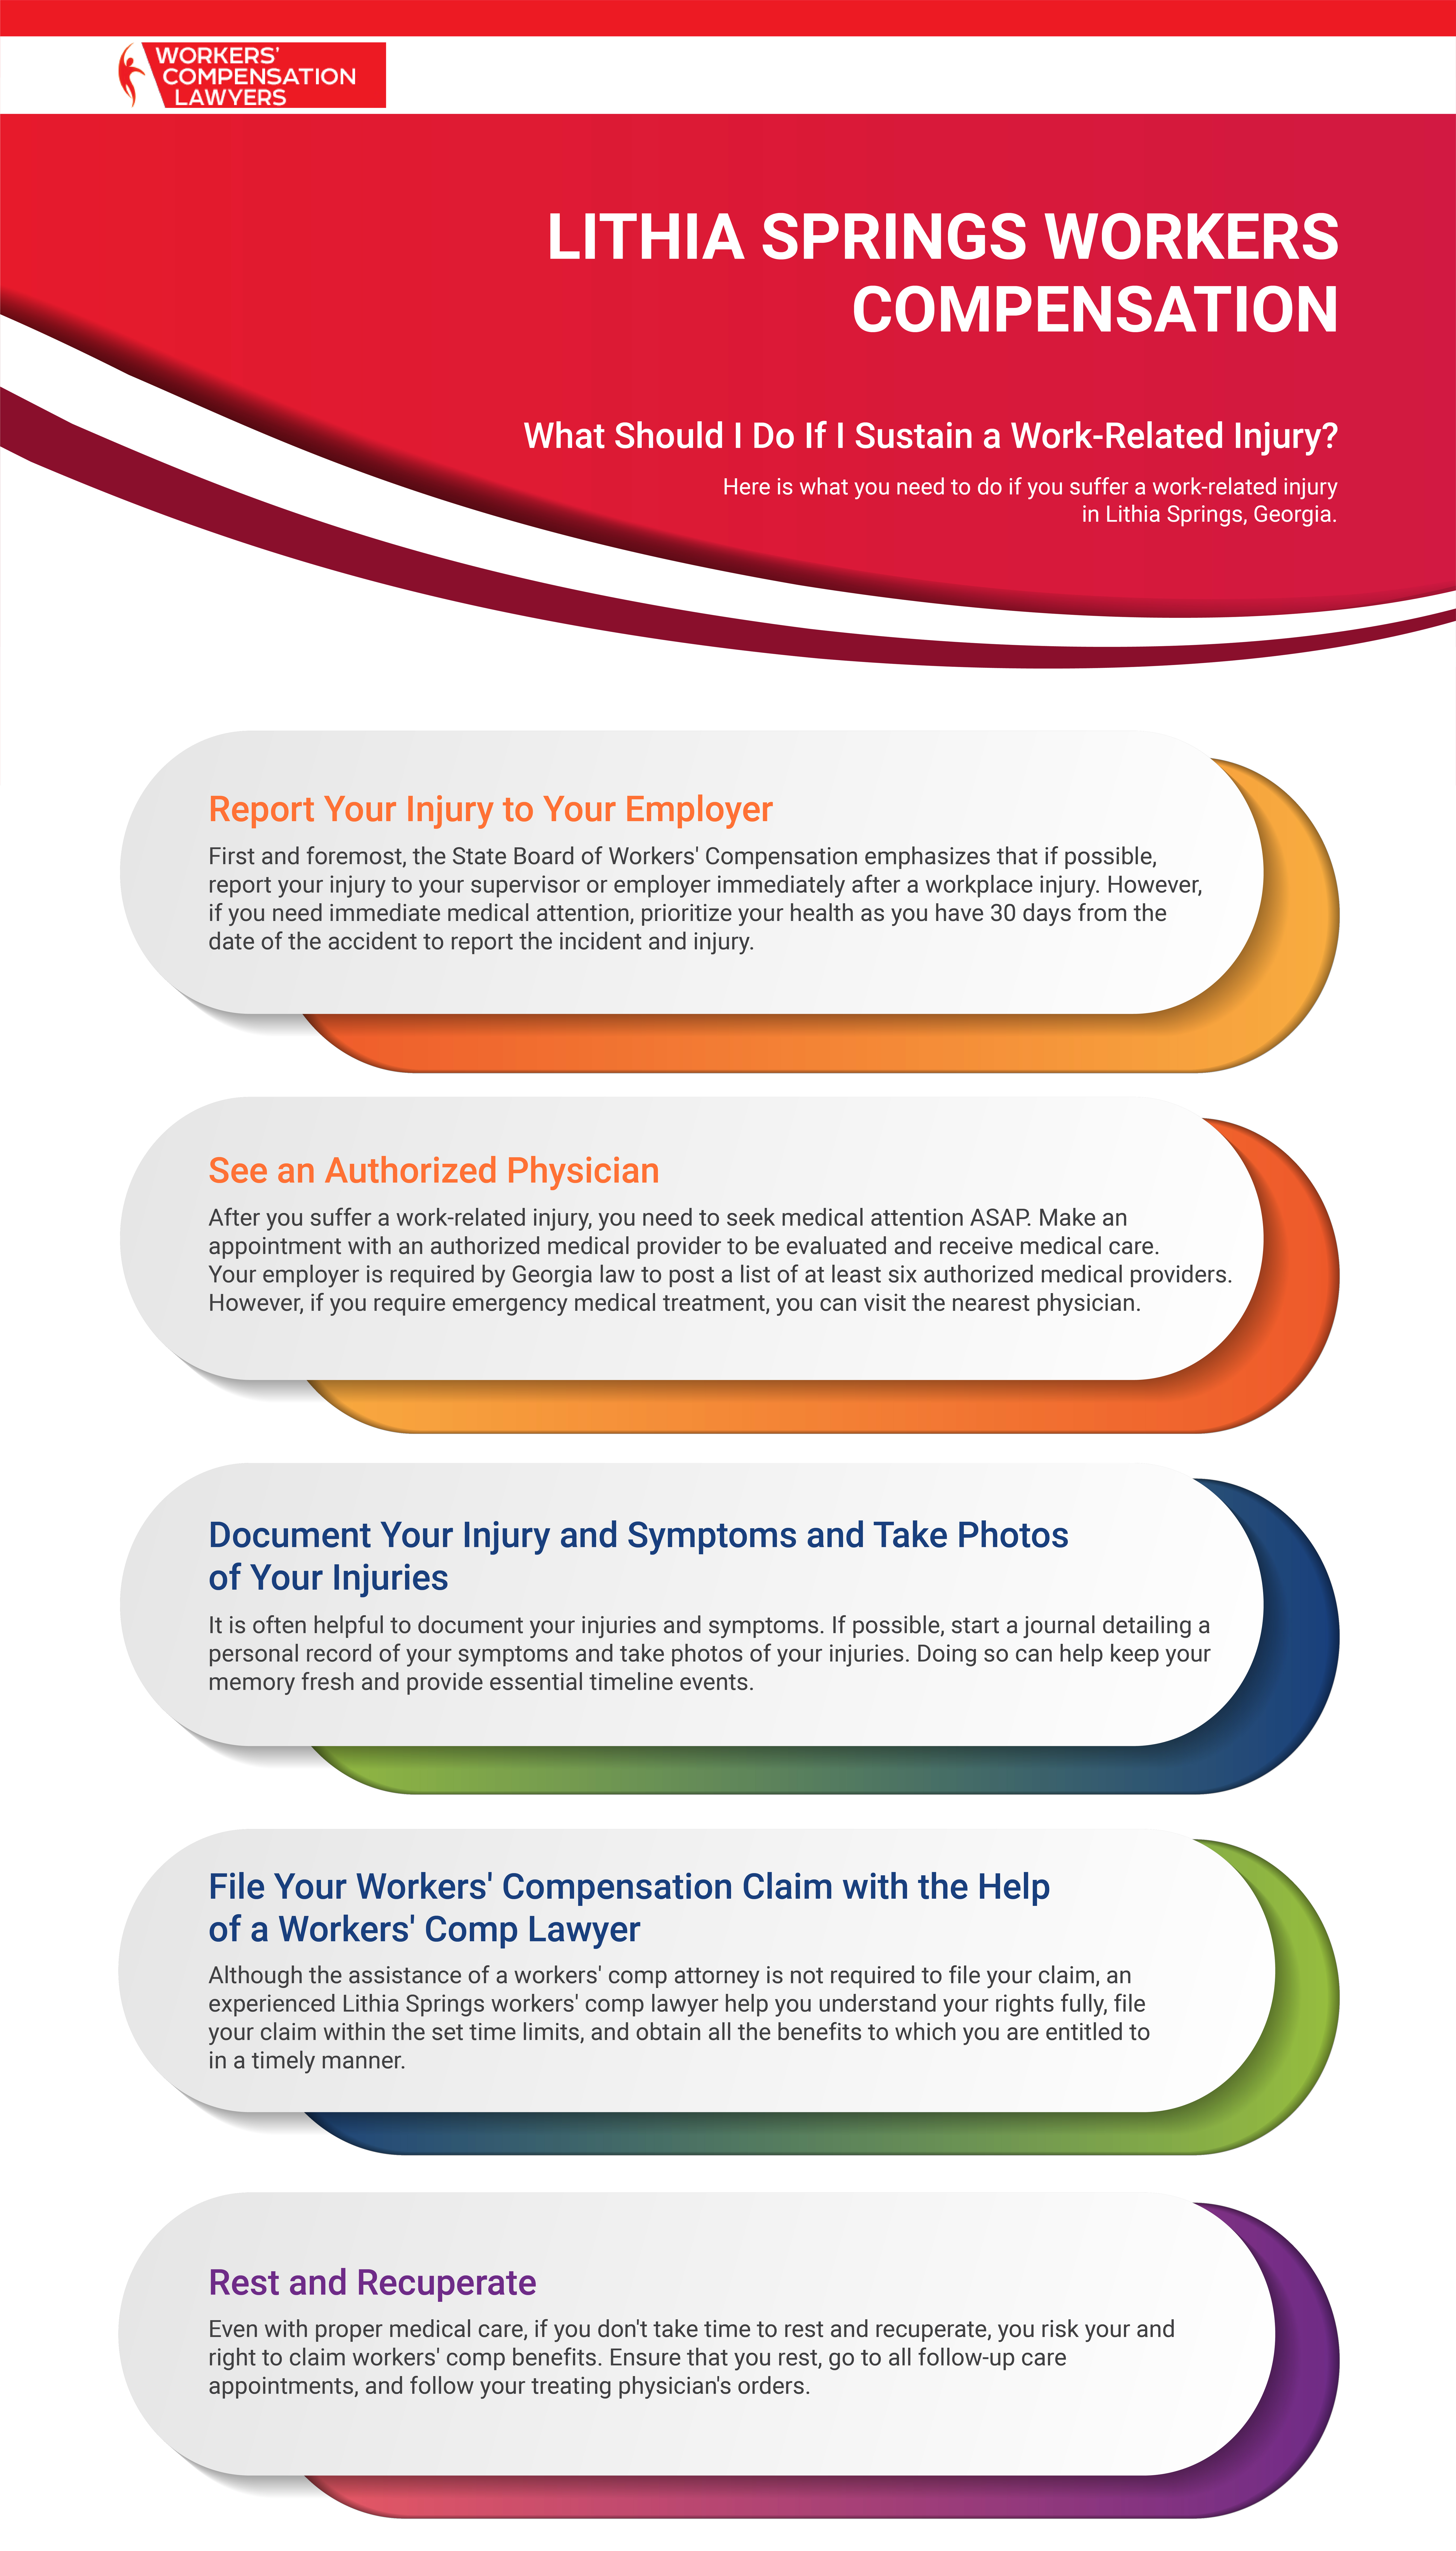 Lithia Springs Workers Compensation Infographic